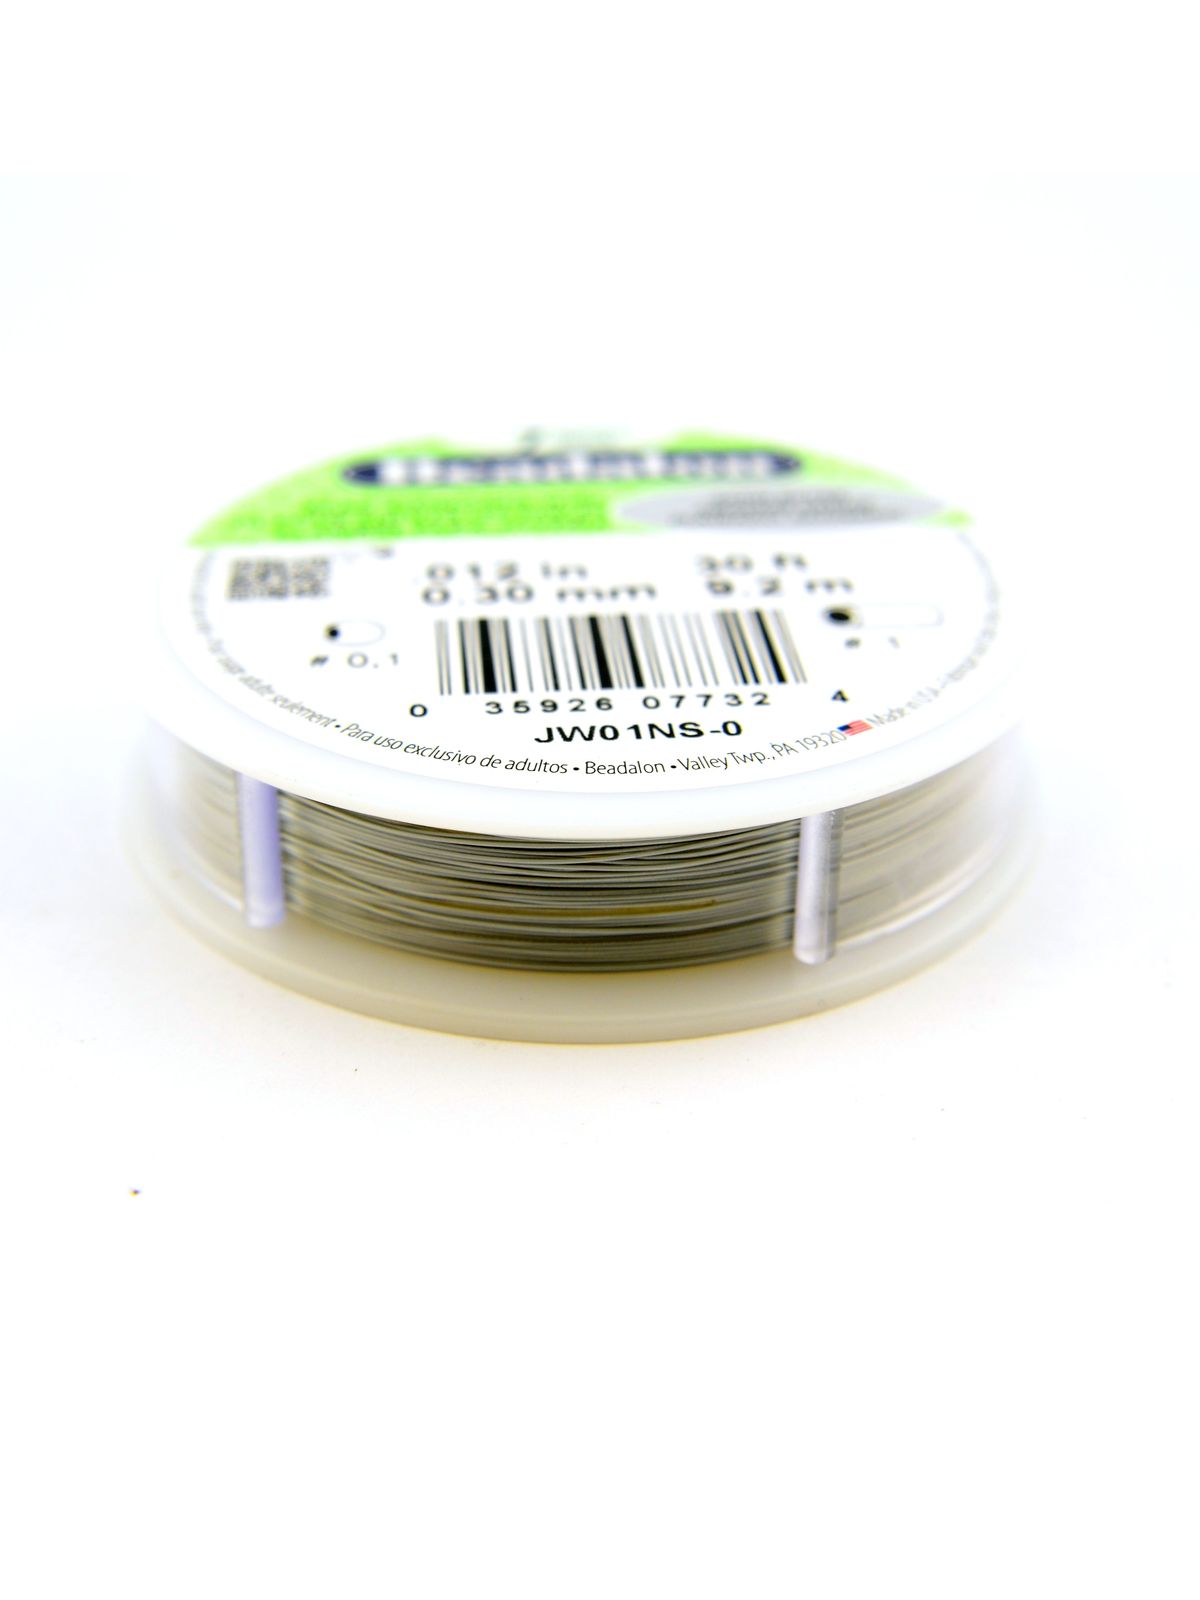 7 Strand Bead Stringing Wire Satin Silver .012 In. (0.30 Mm) 30 Ft. Spool